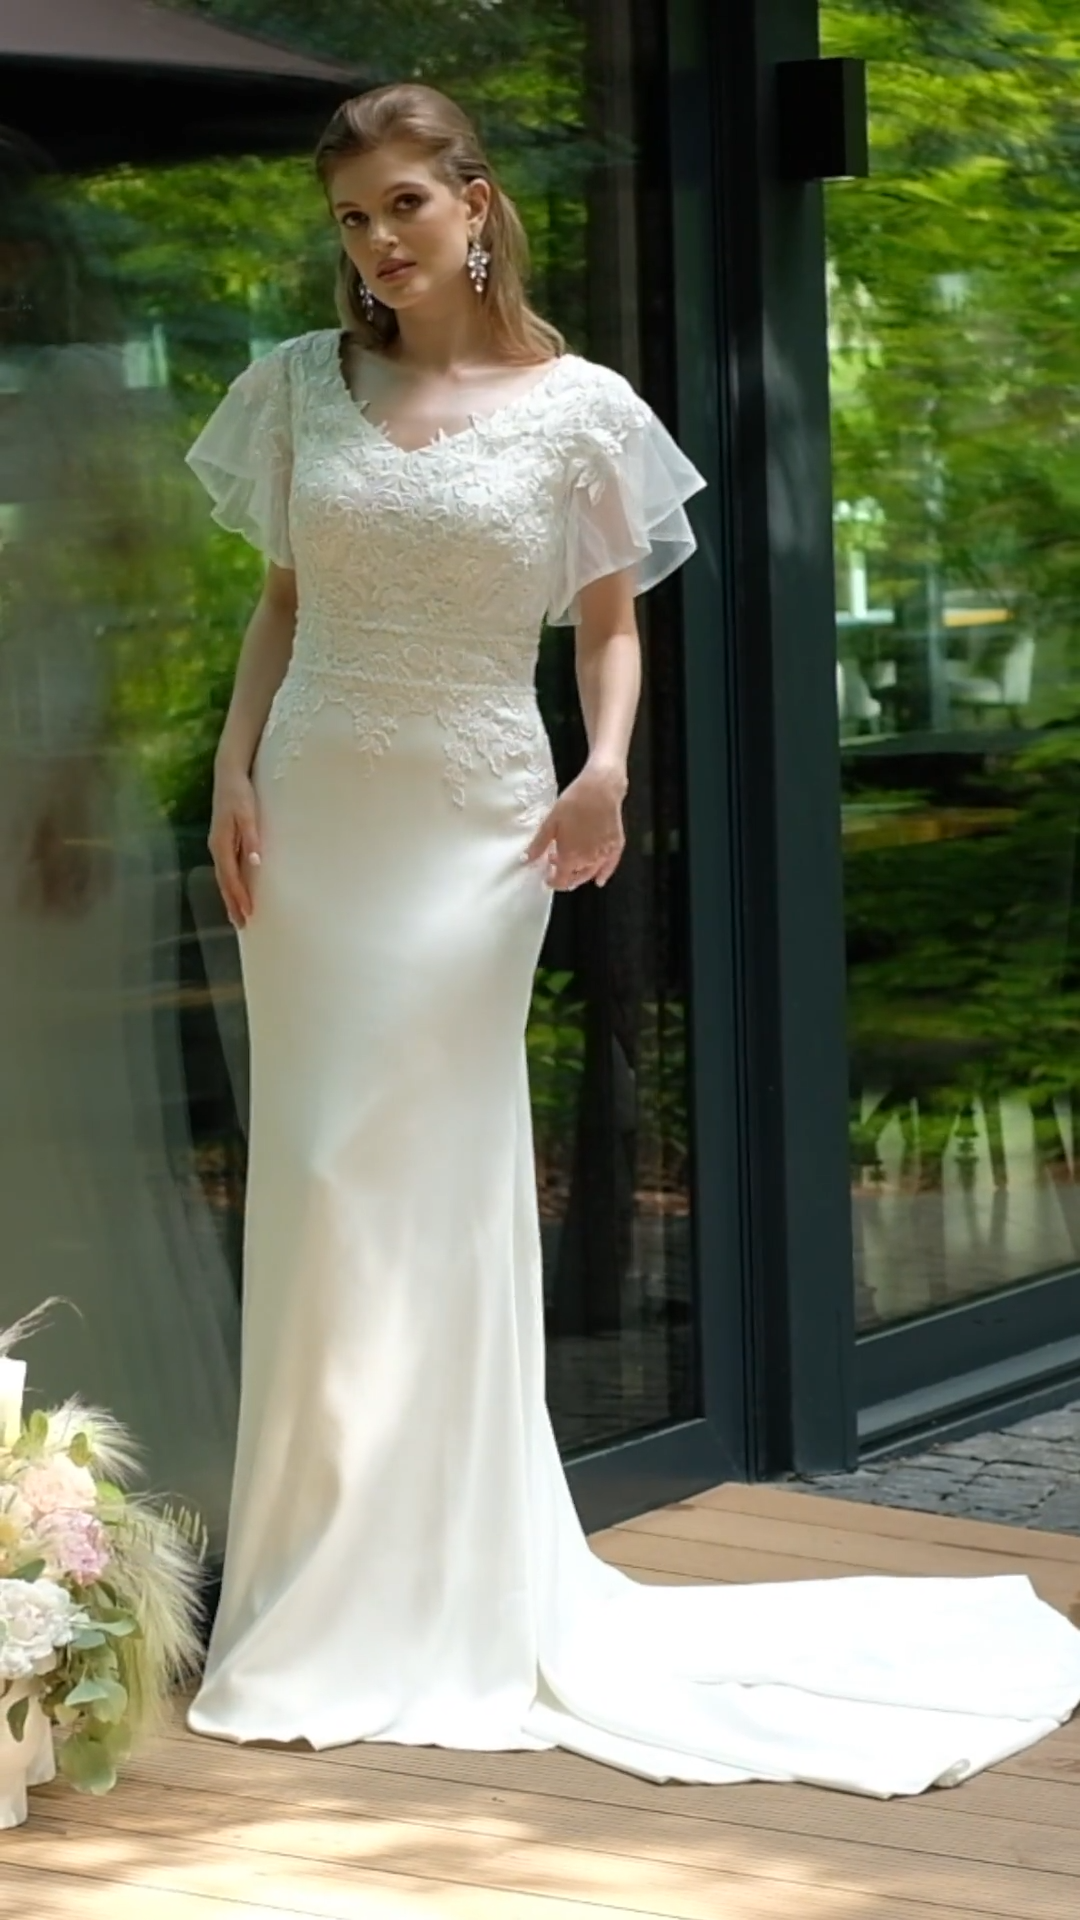 Mermaid Crepe Wedding Dress With Modest V-Neckline and Short Illusion Flutter Sleeves Style M5046